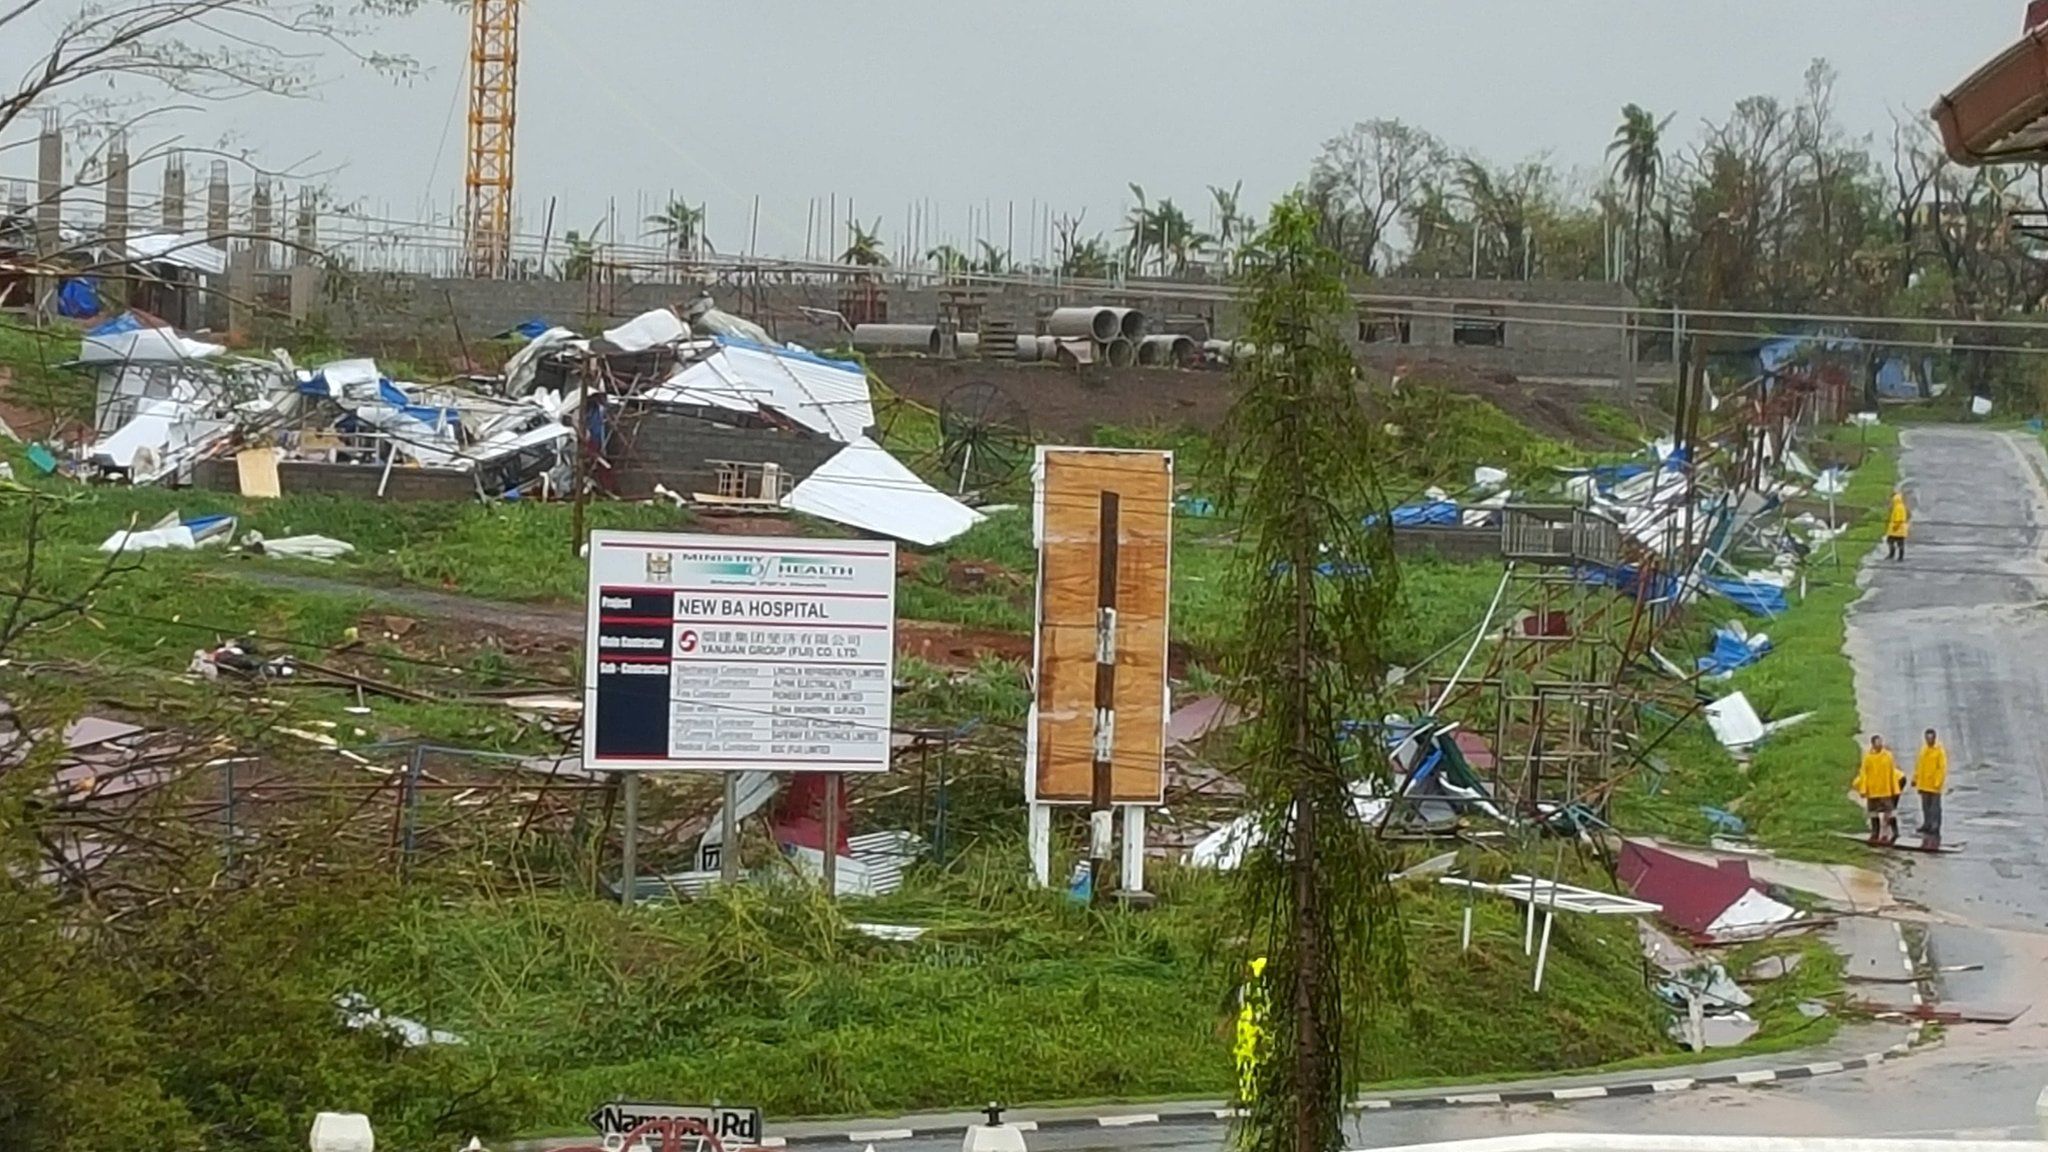 The new hospital in the town of Ba lays ruined after Cyclone Winston swept through Fiji's Viti Levu Island.